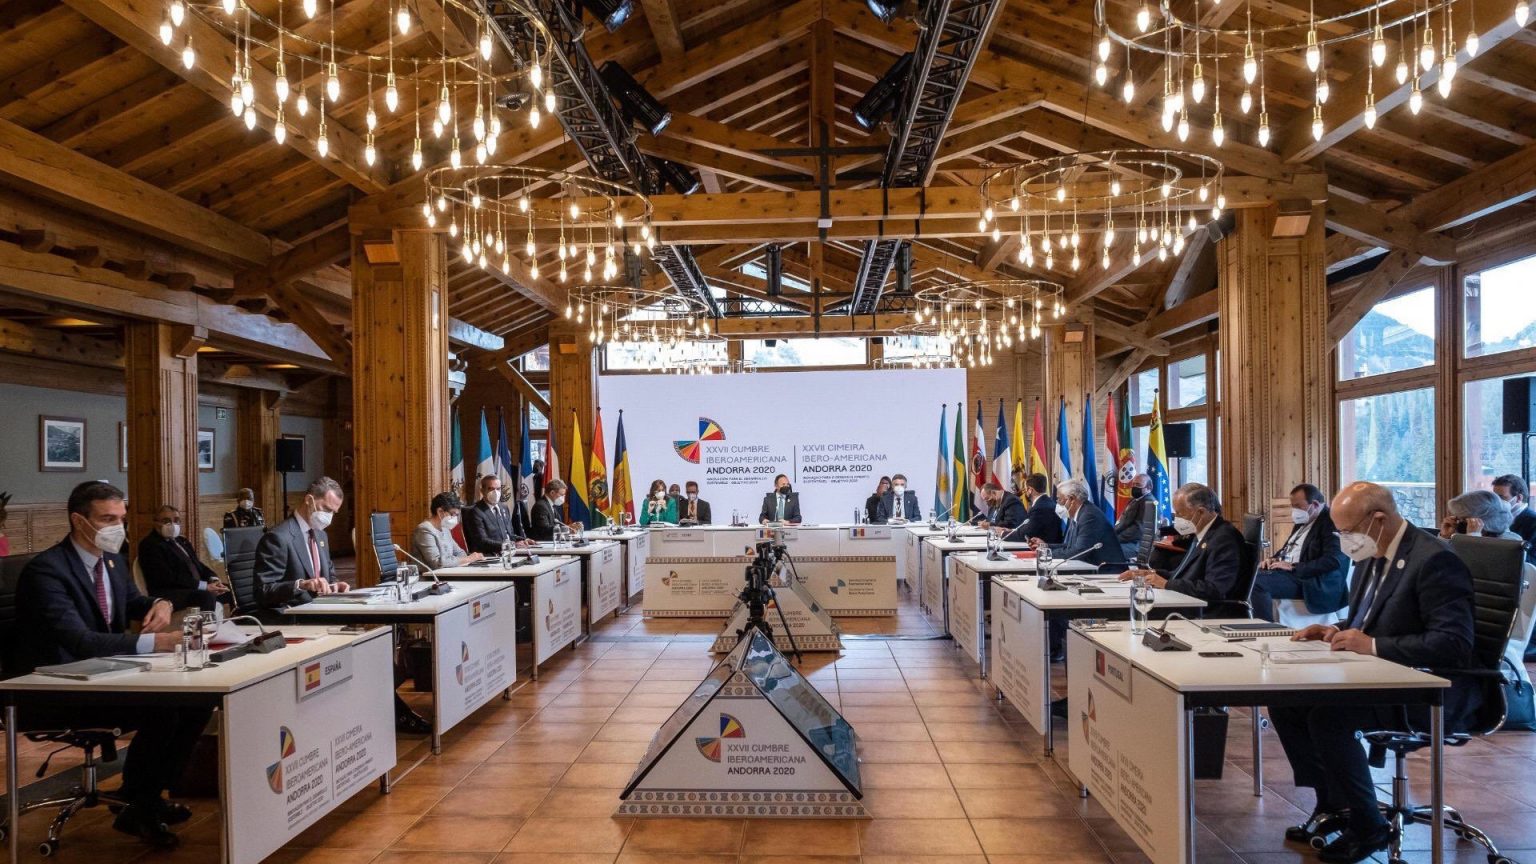 IberoAmerican Summit in Andorra concluded with call for equitable